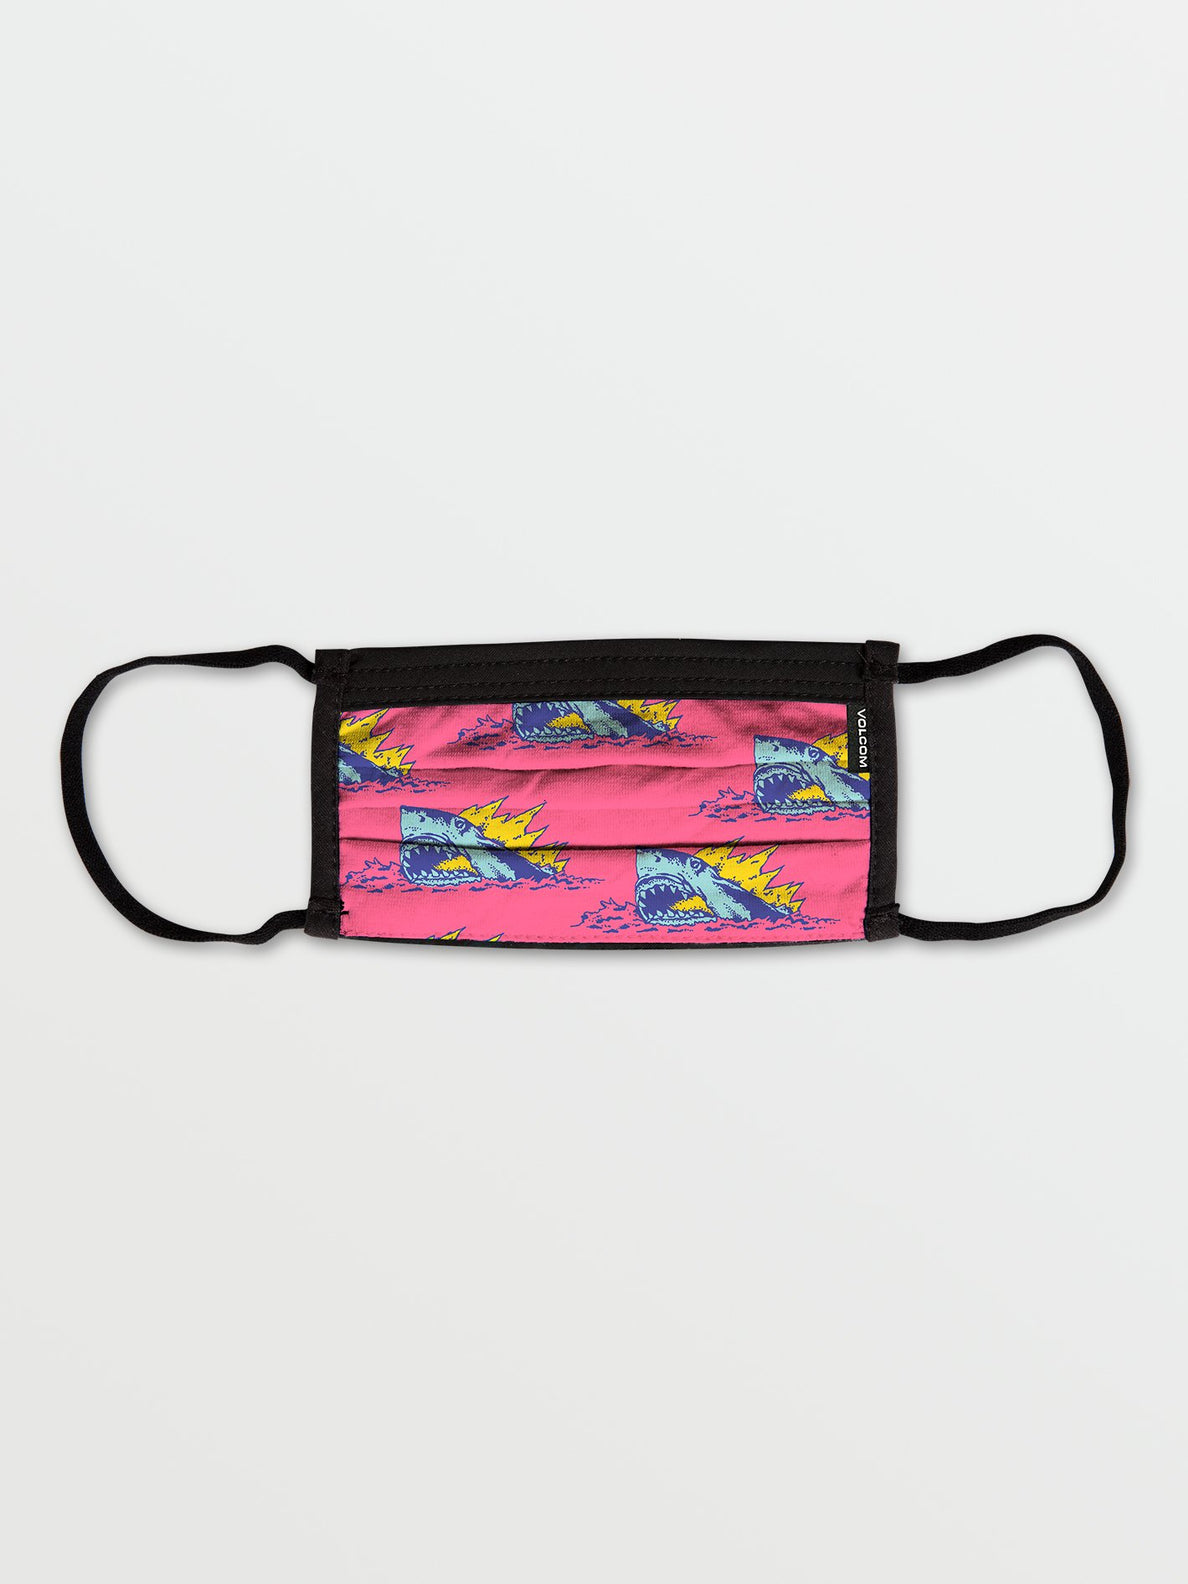 Little Youth Volcom Assorted Face Mask - Neon Pink